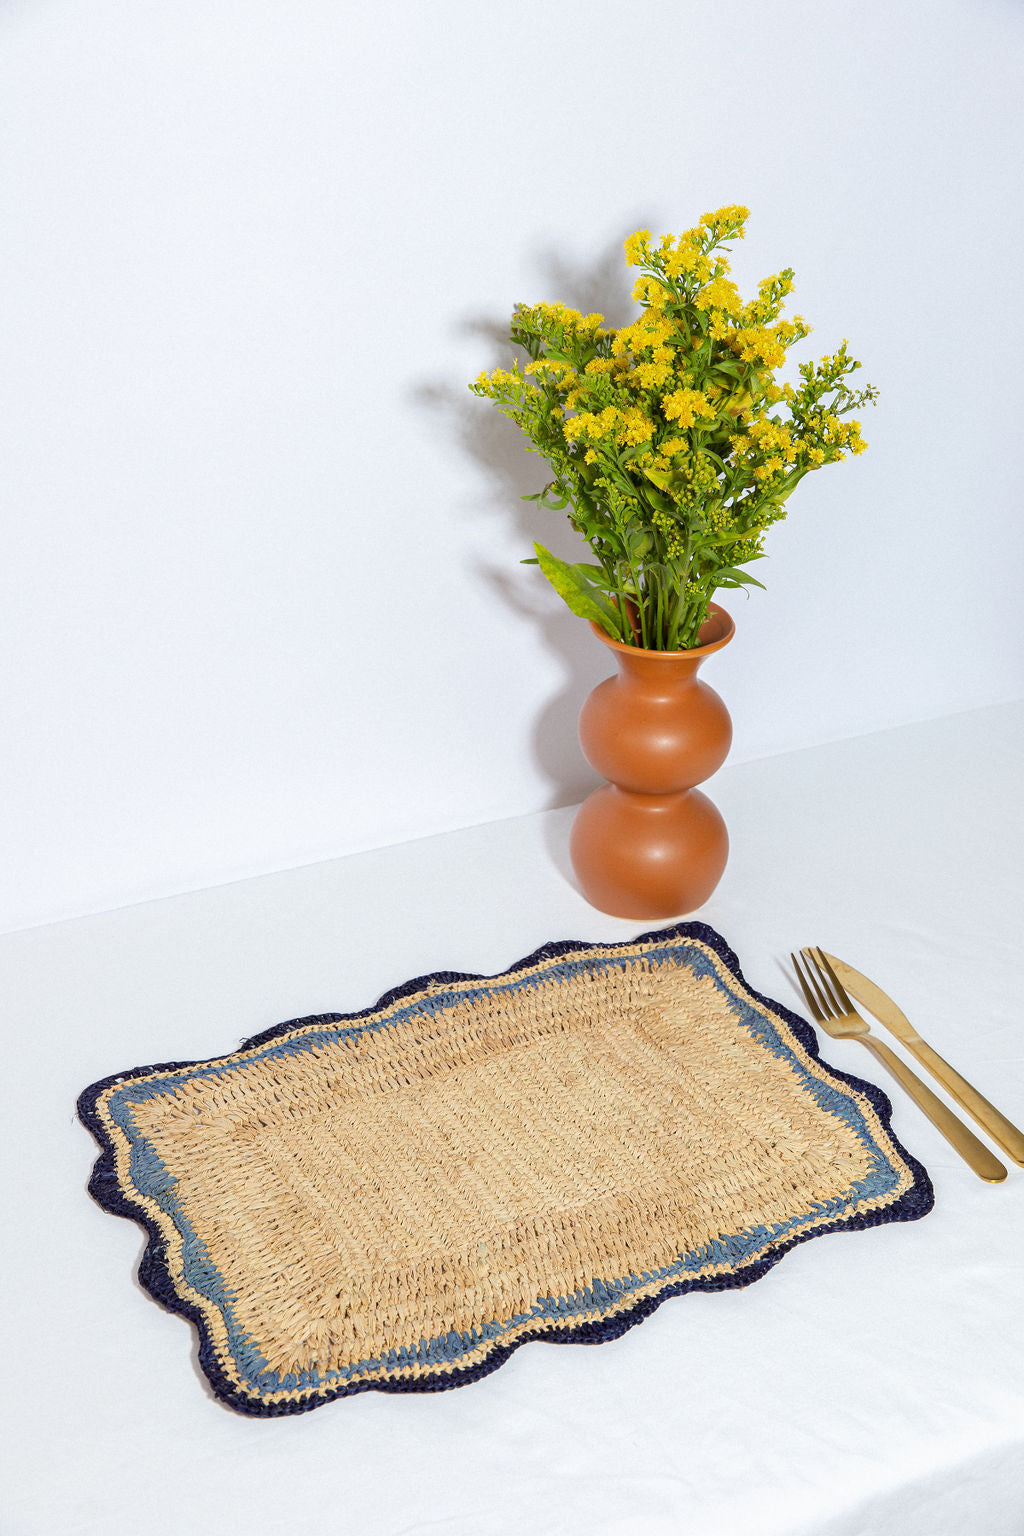 Garden Party placemats with Blue Edges, Handmade Woven Rectangular Table Mats, Natural raffia boho Placemat for Dining Table